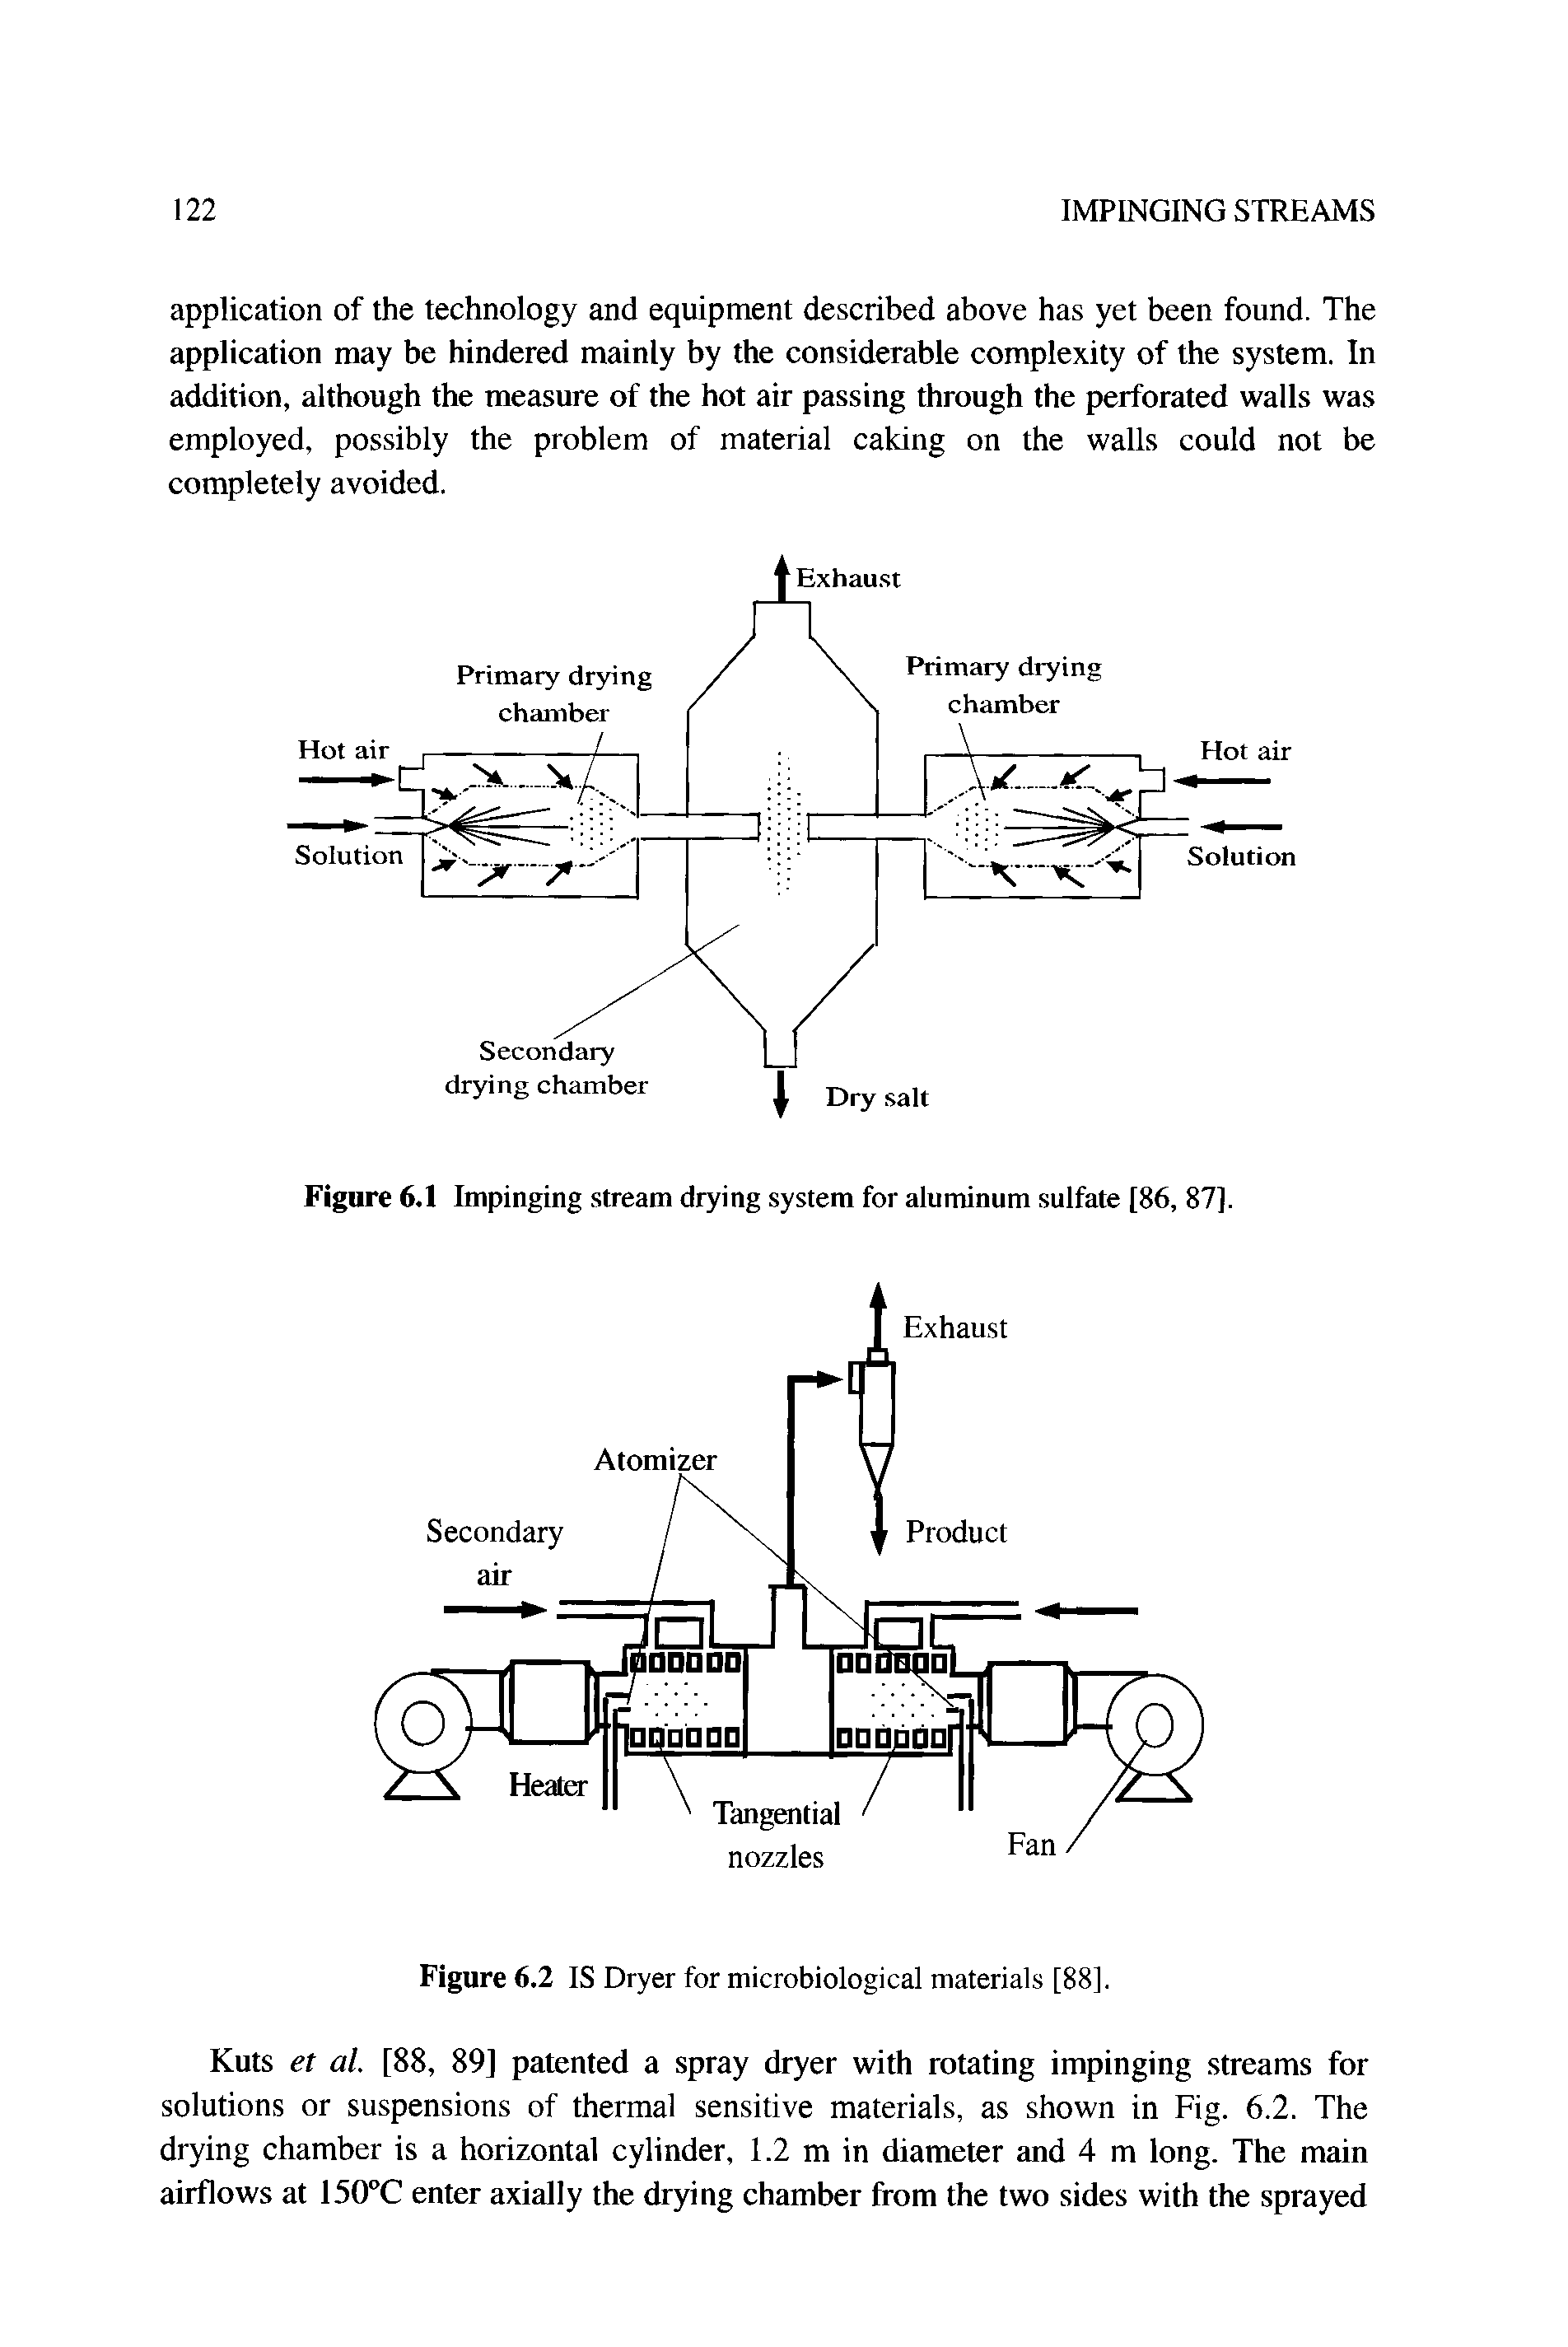 Figure 6.1 Impinging stream drying system for aluminum sulfate [86, 87].